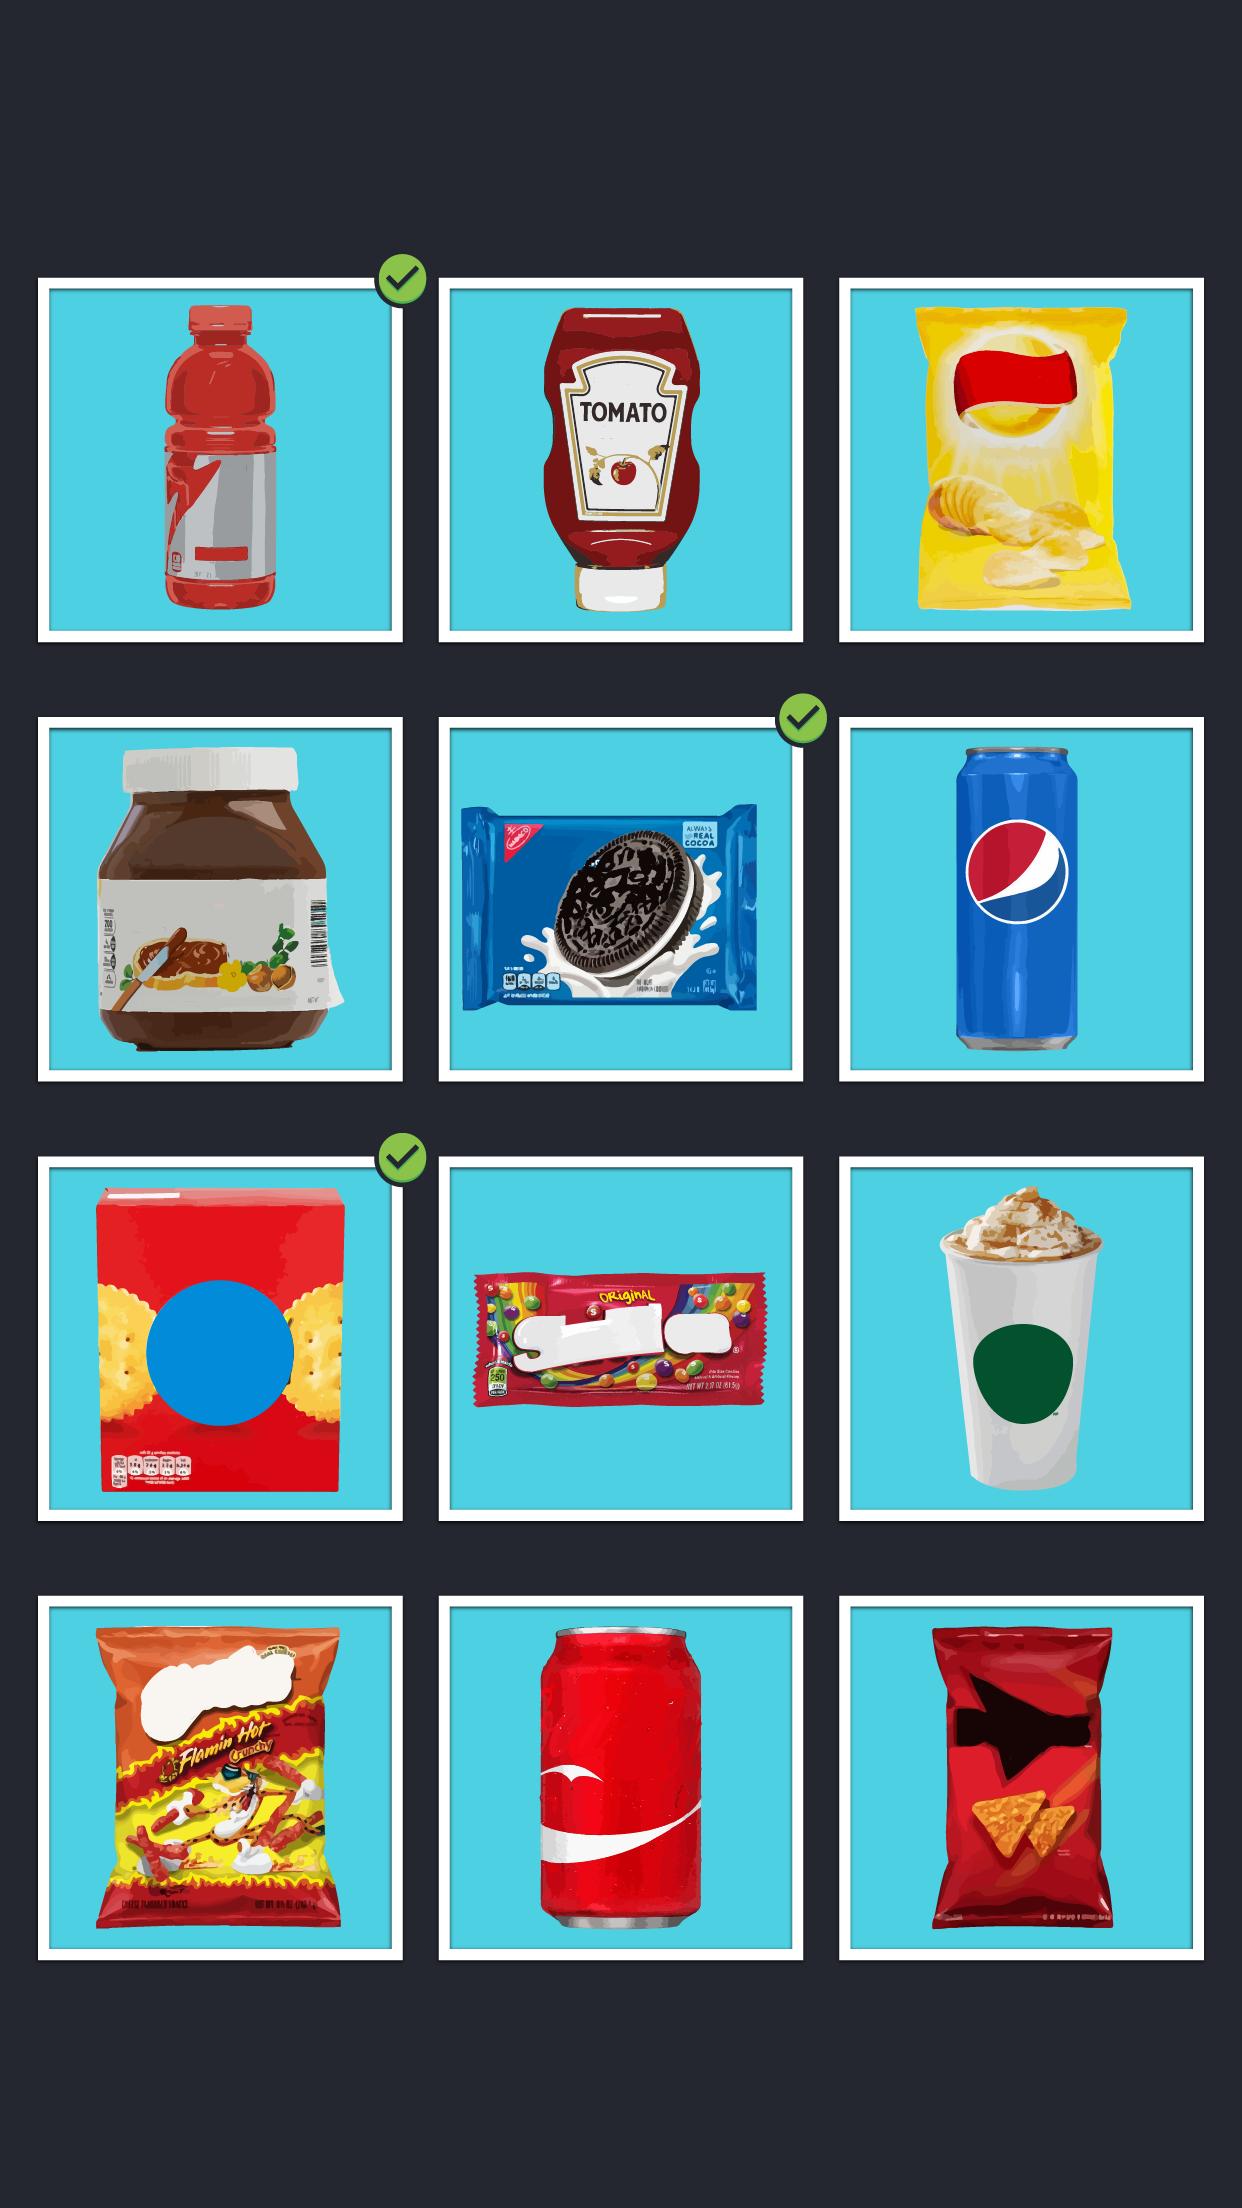 Food Quiz - Guess the Food for Android - APK Download